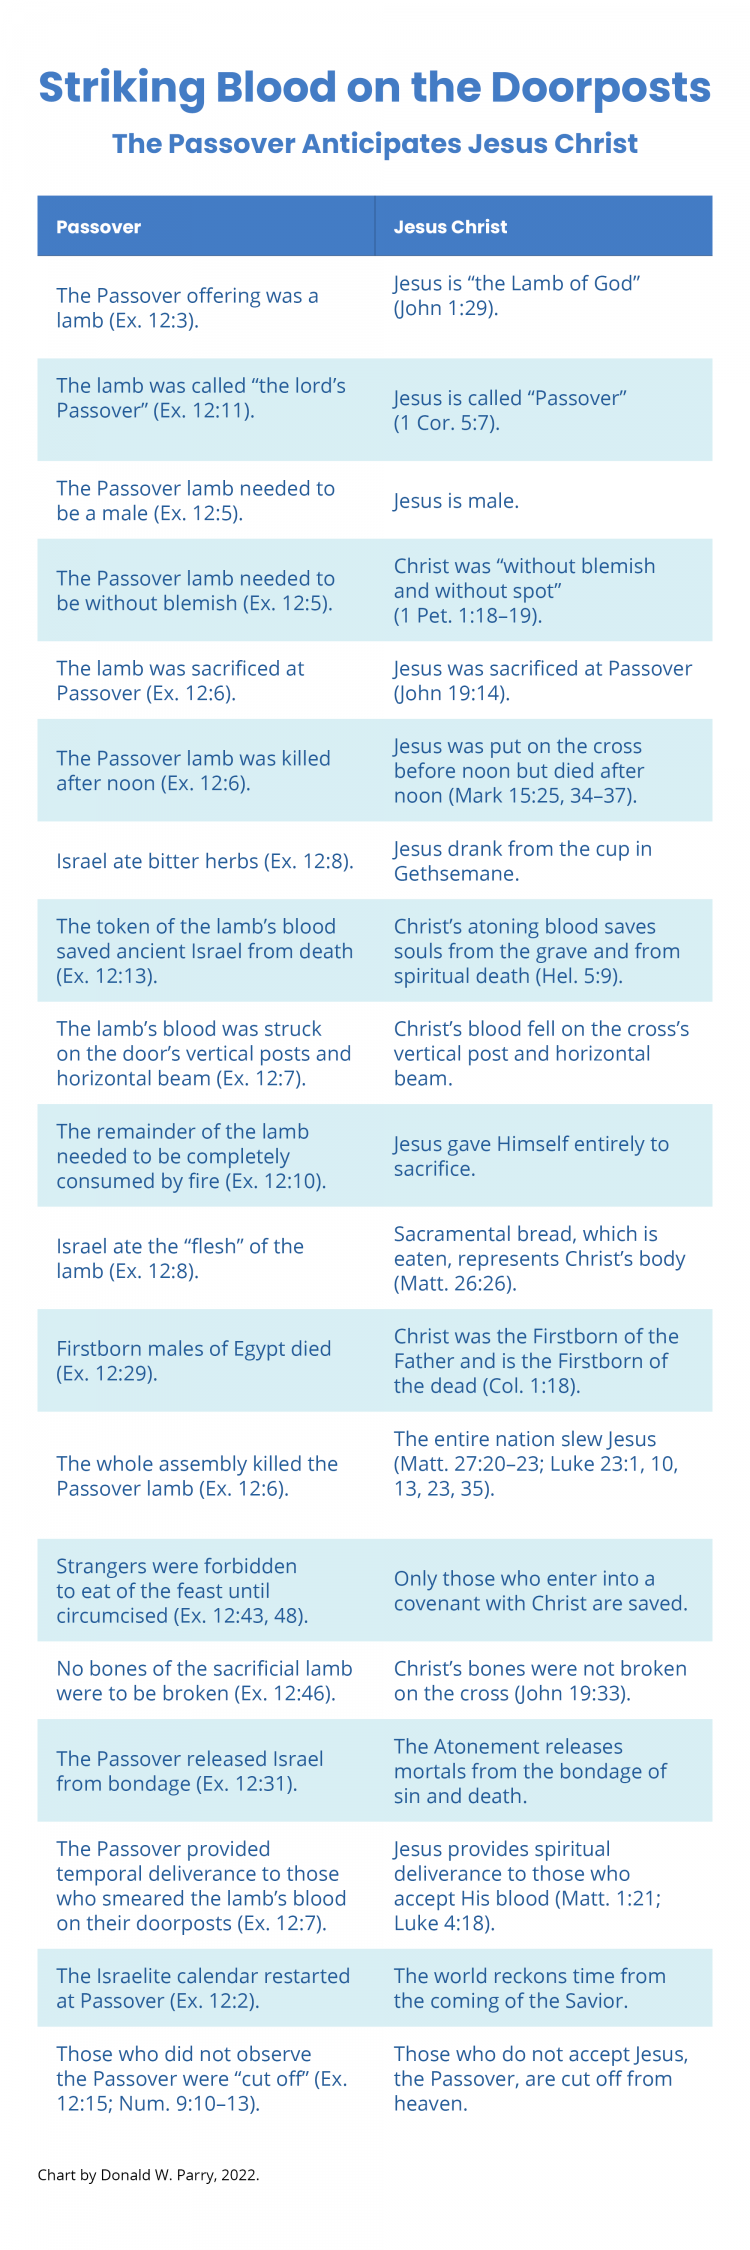 Chart by Donald W. Parry. Striking Blood on the Doorposts: The Passover Anticipates Jesus Christ.